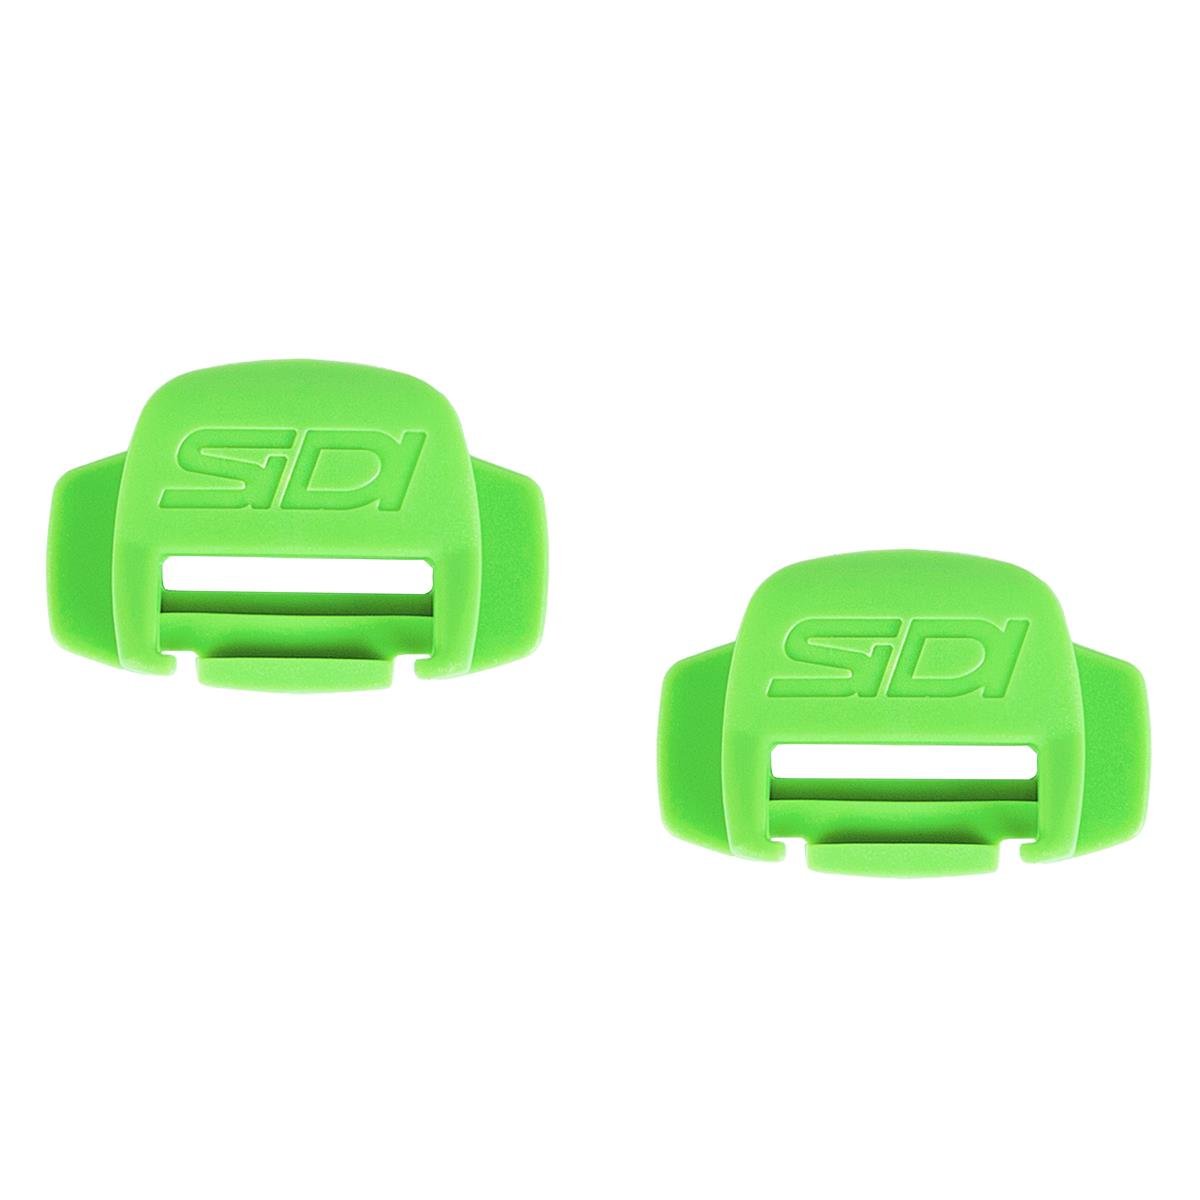 Sidi Replacement Strap Holder Crossfire / Agueda / Stinger / X-3 / Trial Green